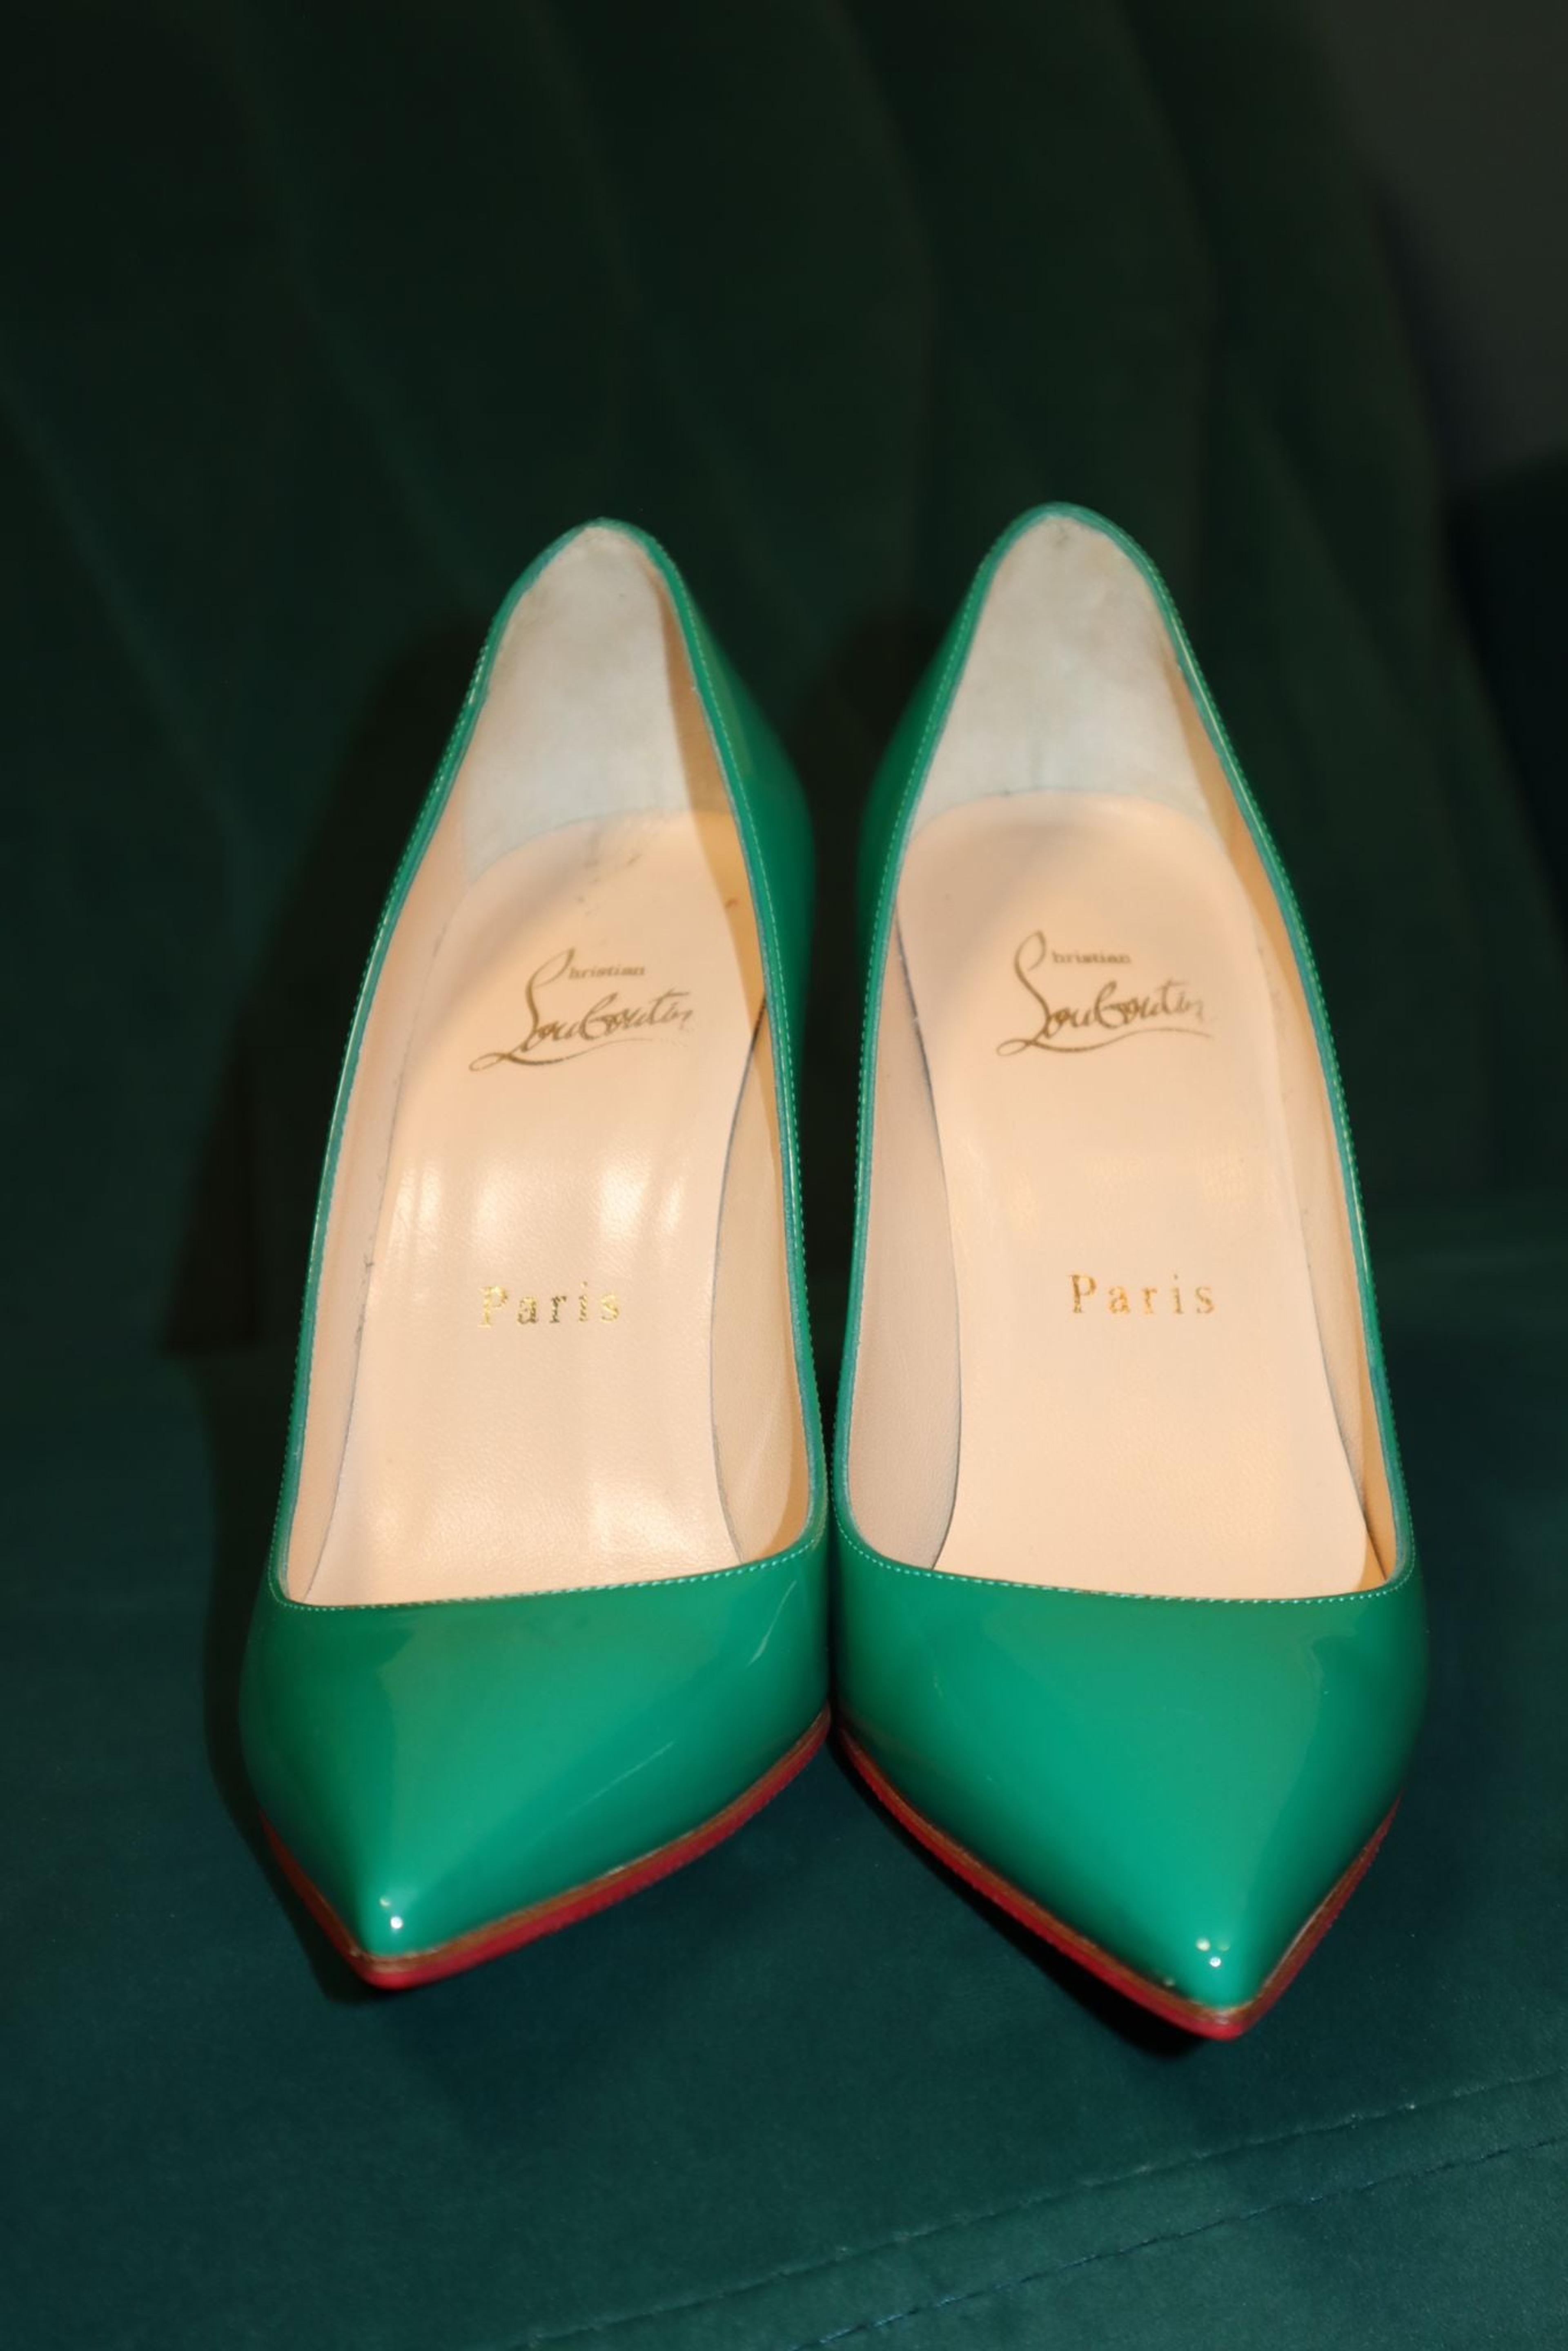 Alternate View 3 of Christian Louboutin Green Patent Leather Kate Pumps 35.5